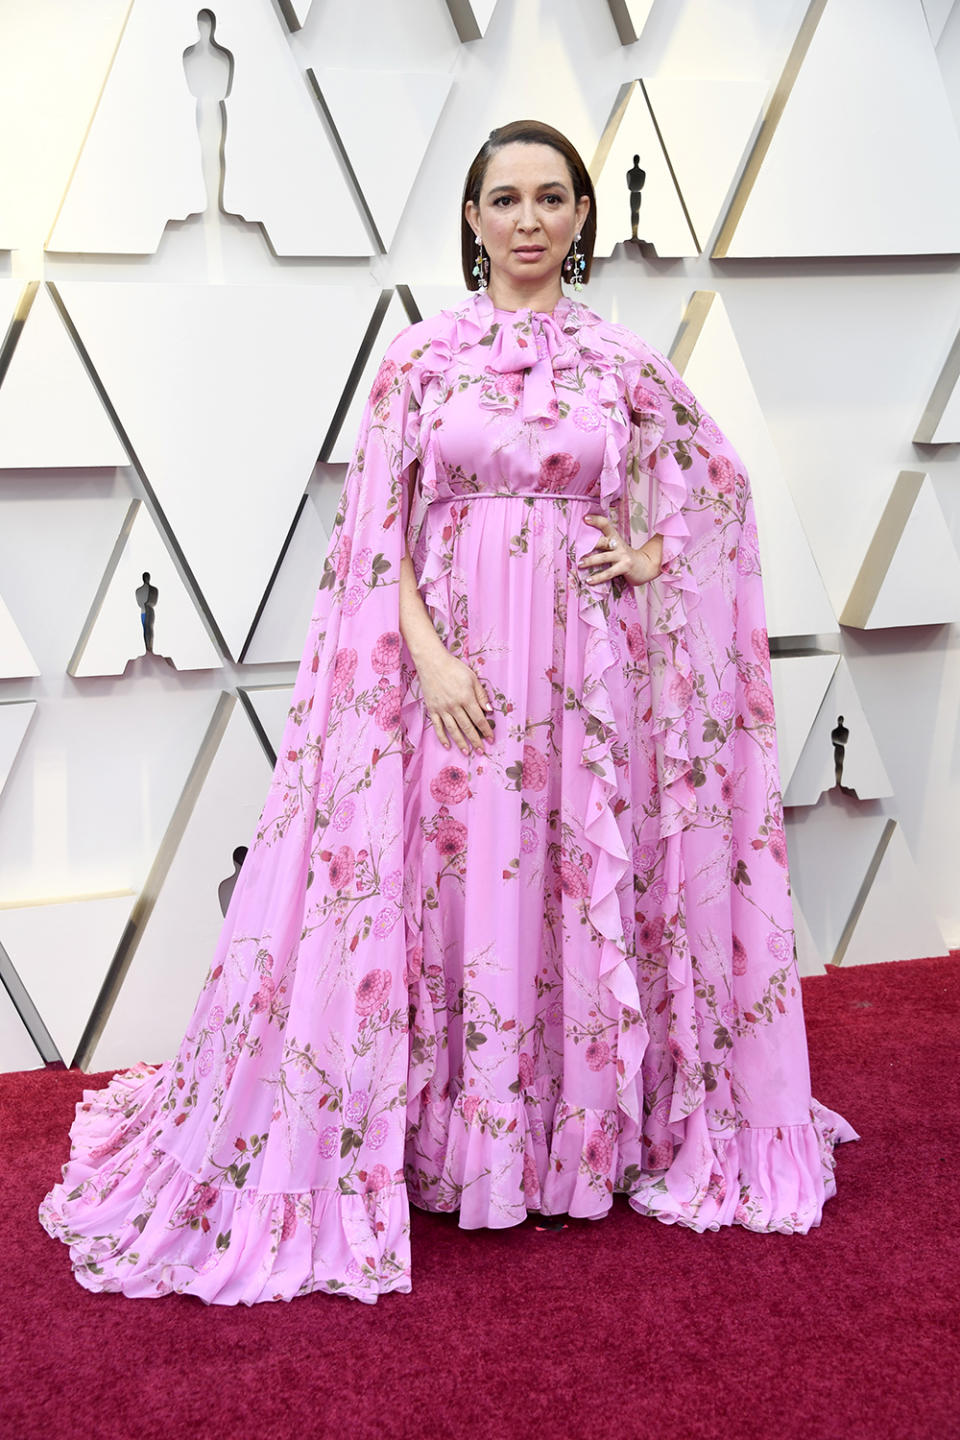 <p>The ‘Bridesmaids’ star added some print to her pink look, wearing a caped, floral dress to the Academy Awards. <em>[Photo: Getty]</em> </p>